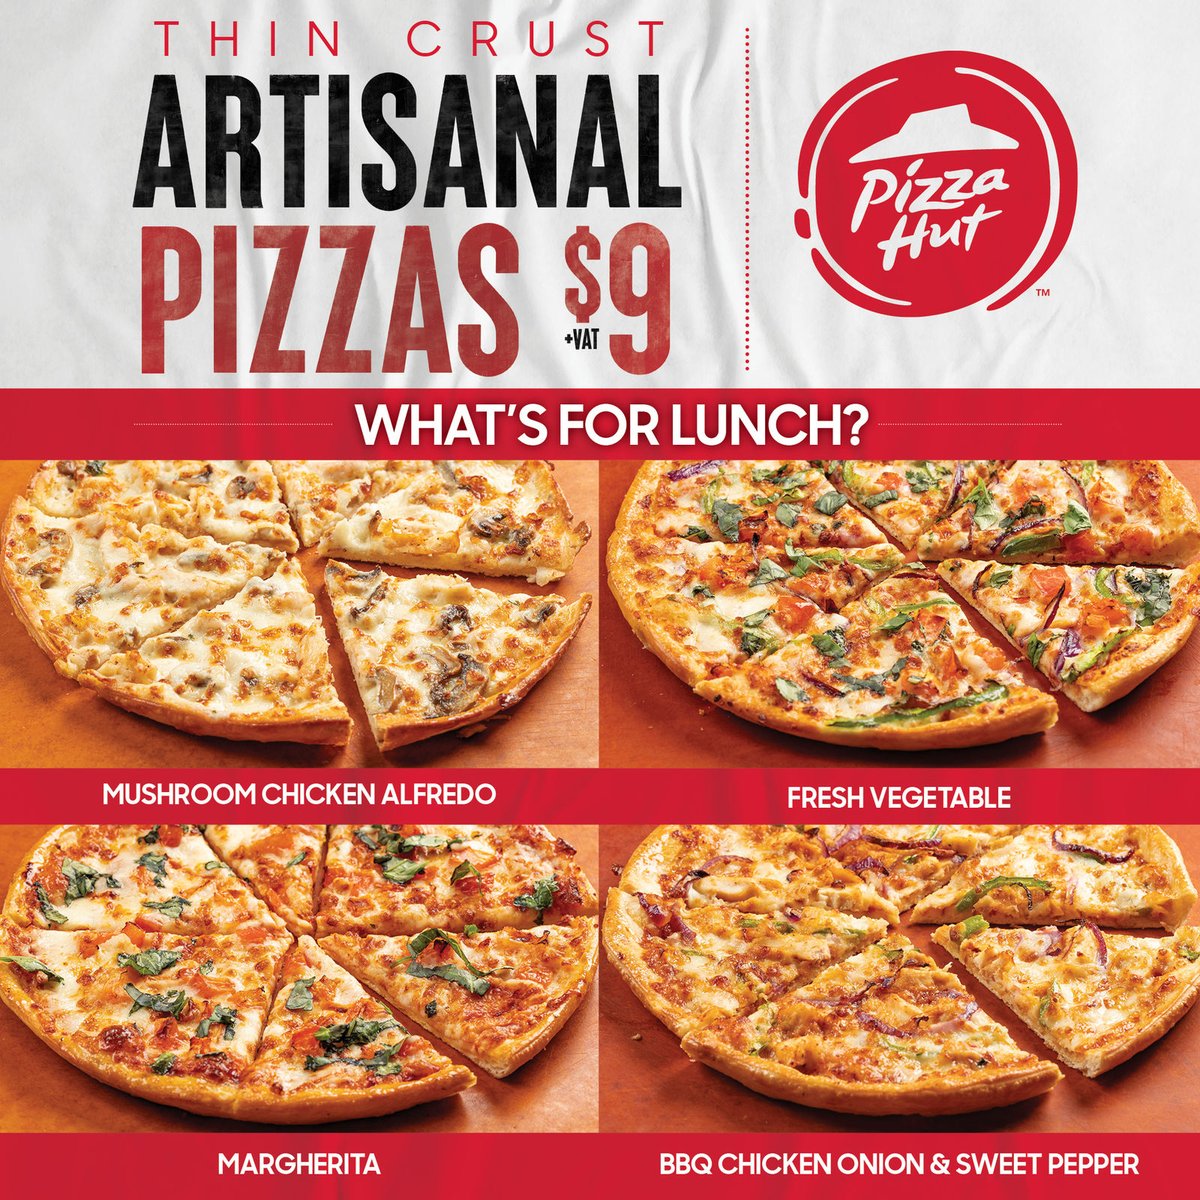 🍕The perfect lunch choice is our Thin Crust Artisanal Pizzas!
.
.
.
#PizzaForLunch #LunchDeal #LunchTime #ArtisanalPizza #ForTheLoveOfPizza #PizzaHutNassau #ThinCrust #PizzaLover #ThinCrustPizza